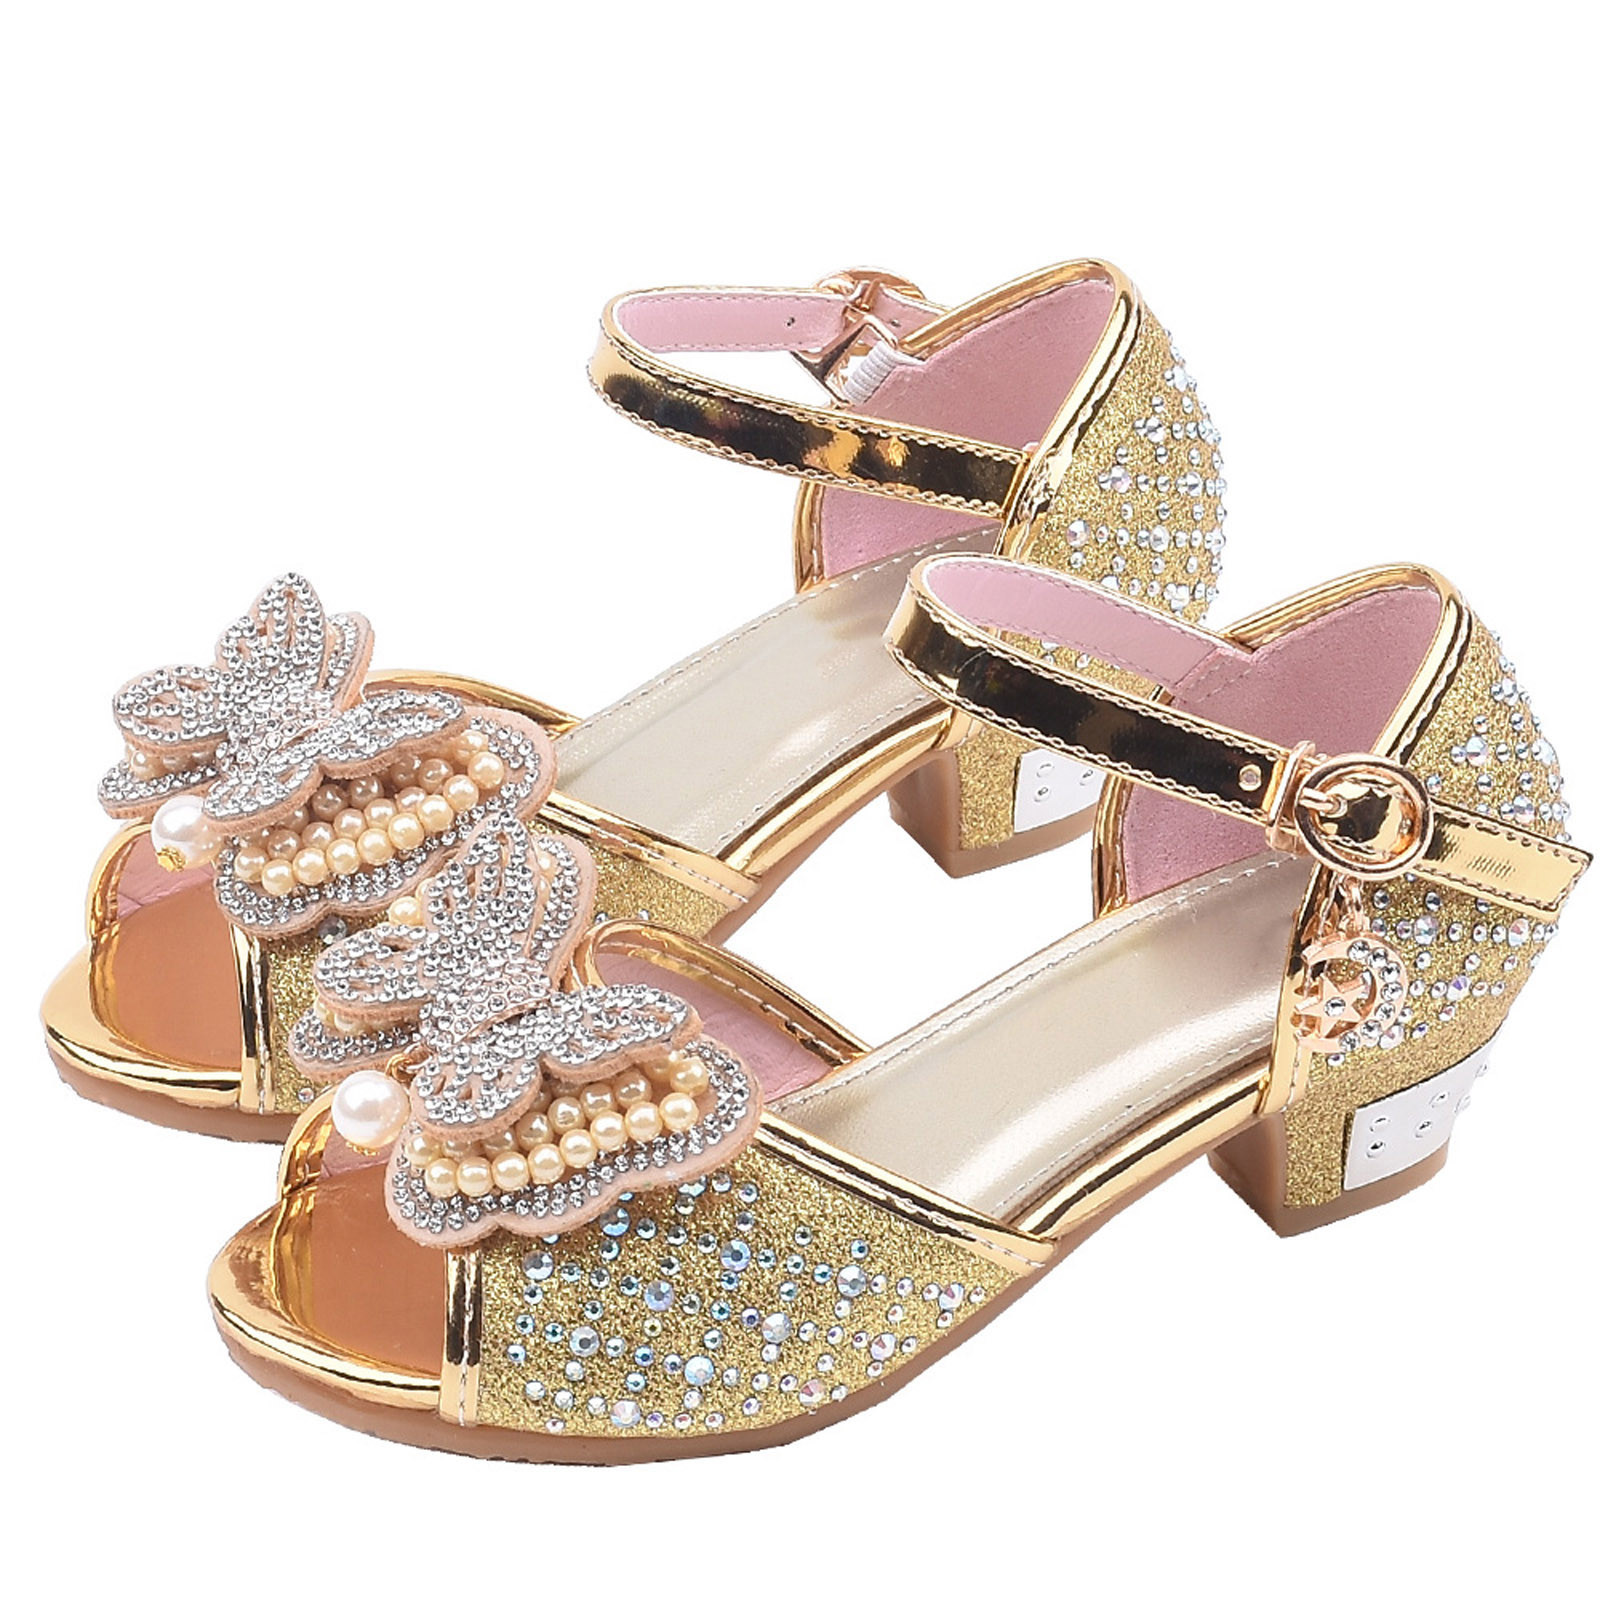 Penkiiy Children's Shoes Girls Fish Mouth Butterfly Pearl Rhinestone Crystal Princess Shoes Dance Shoes Toddler Sandals Wonder 5.5-6 Years Gold On Clearance - image 4 of 7